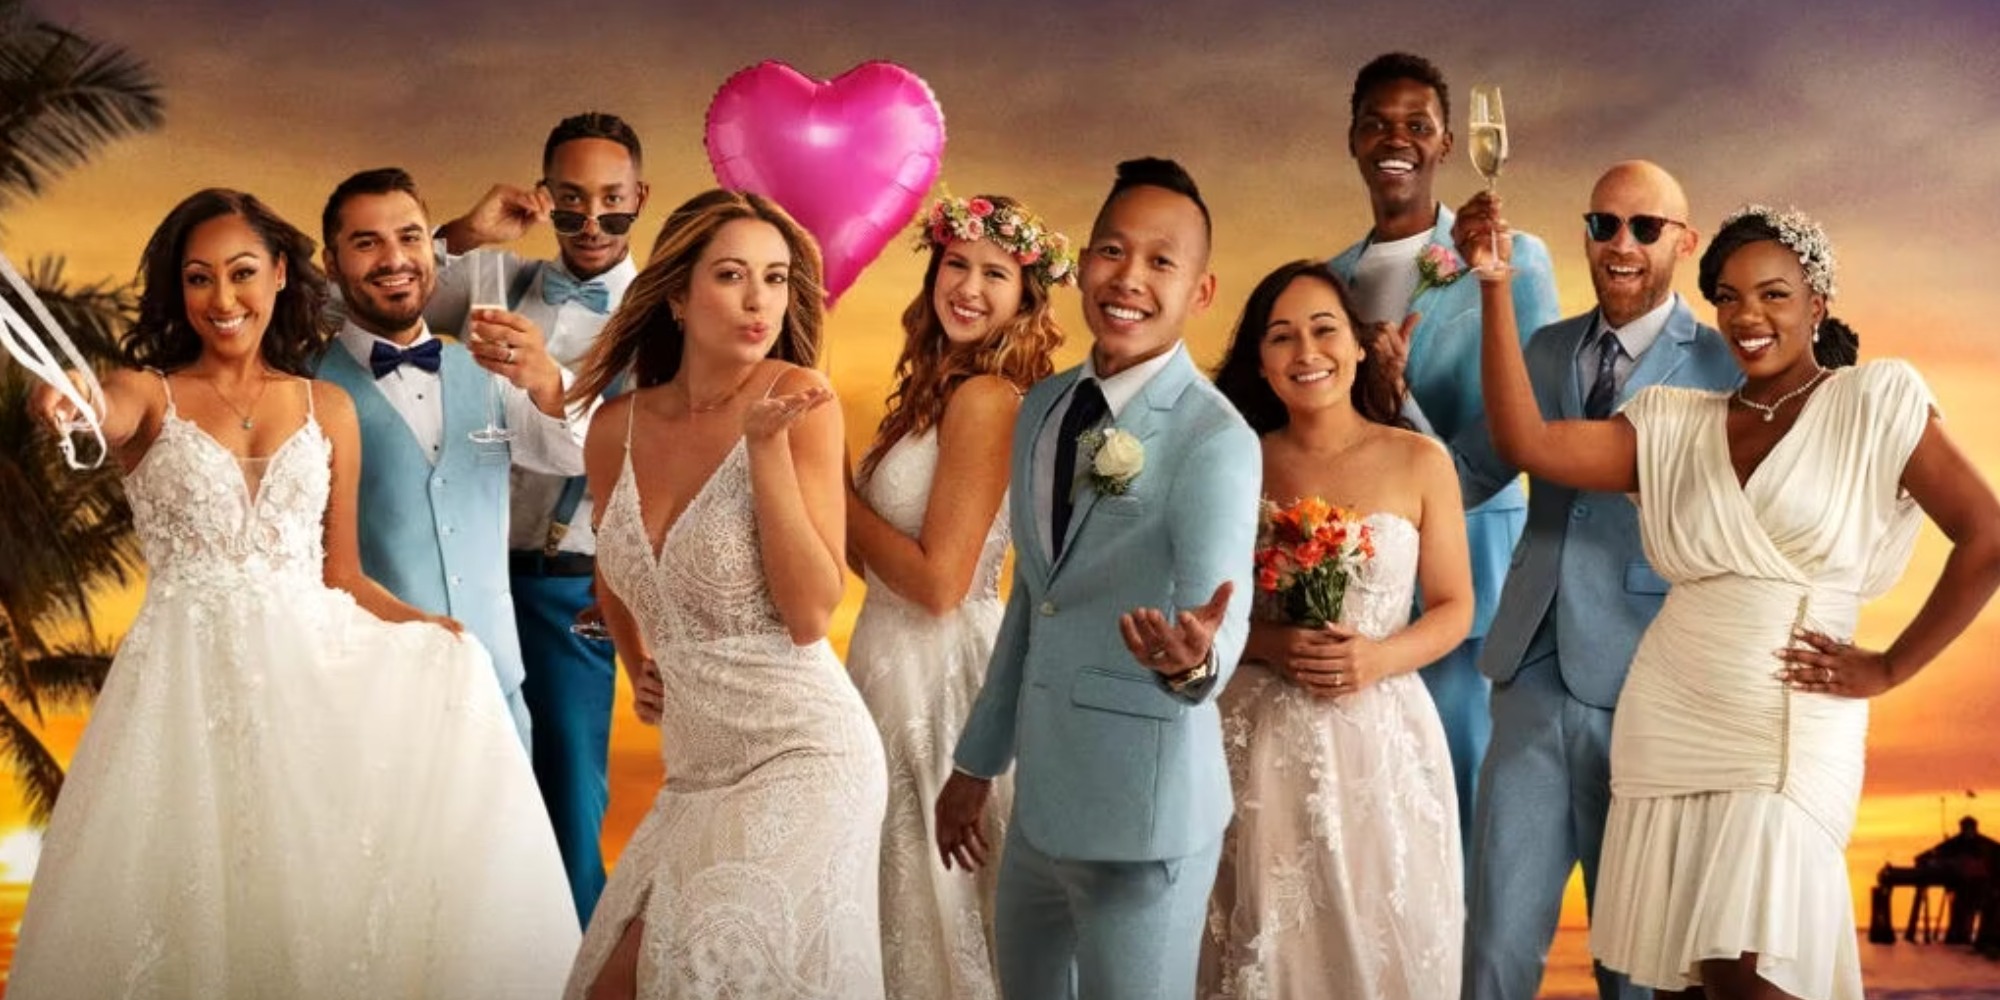 married at first sight season 15 cast all dressed up and posed